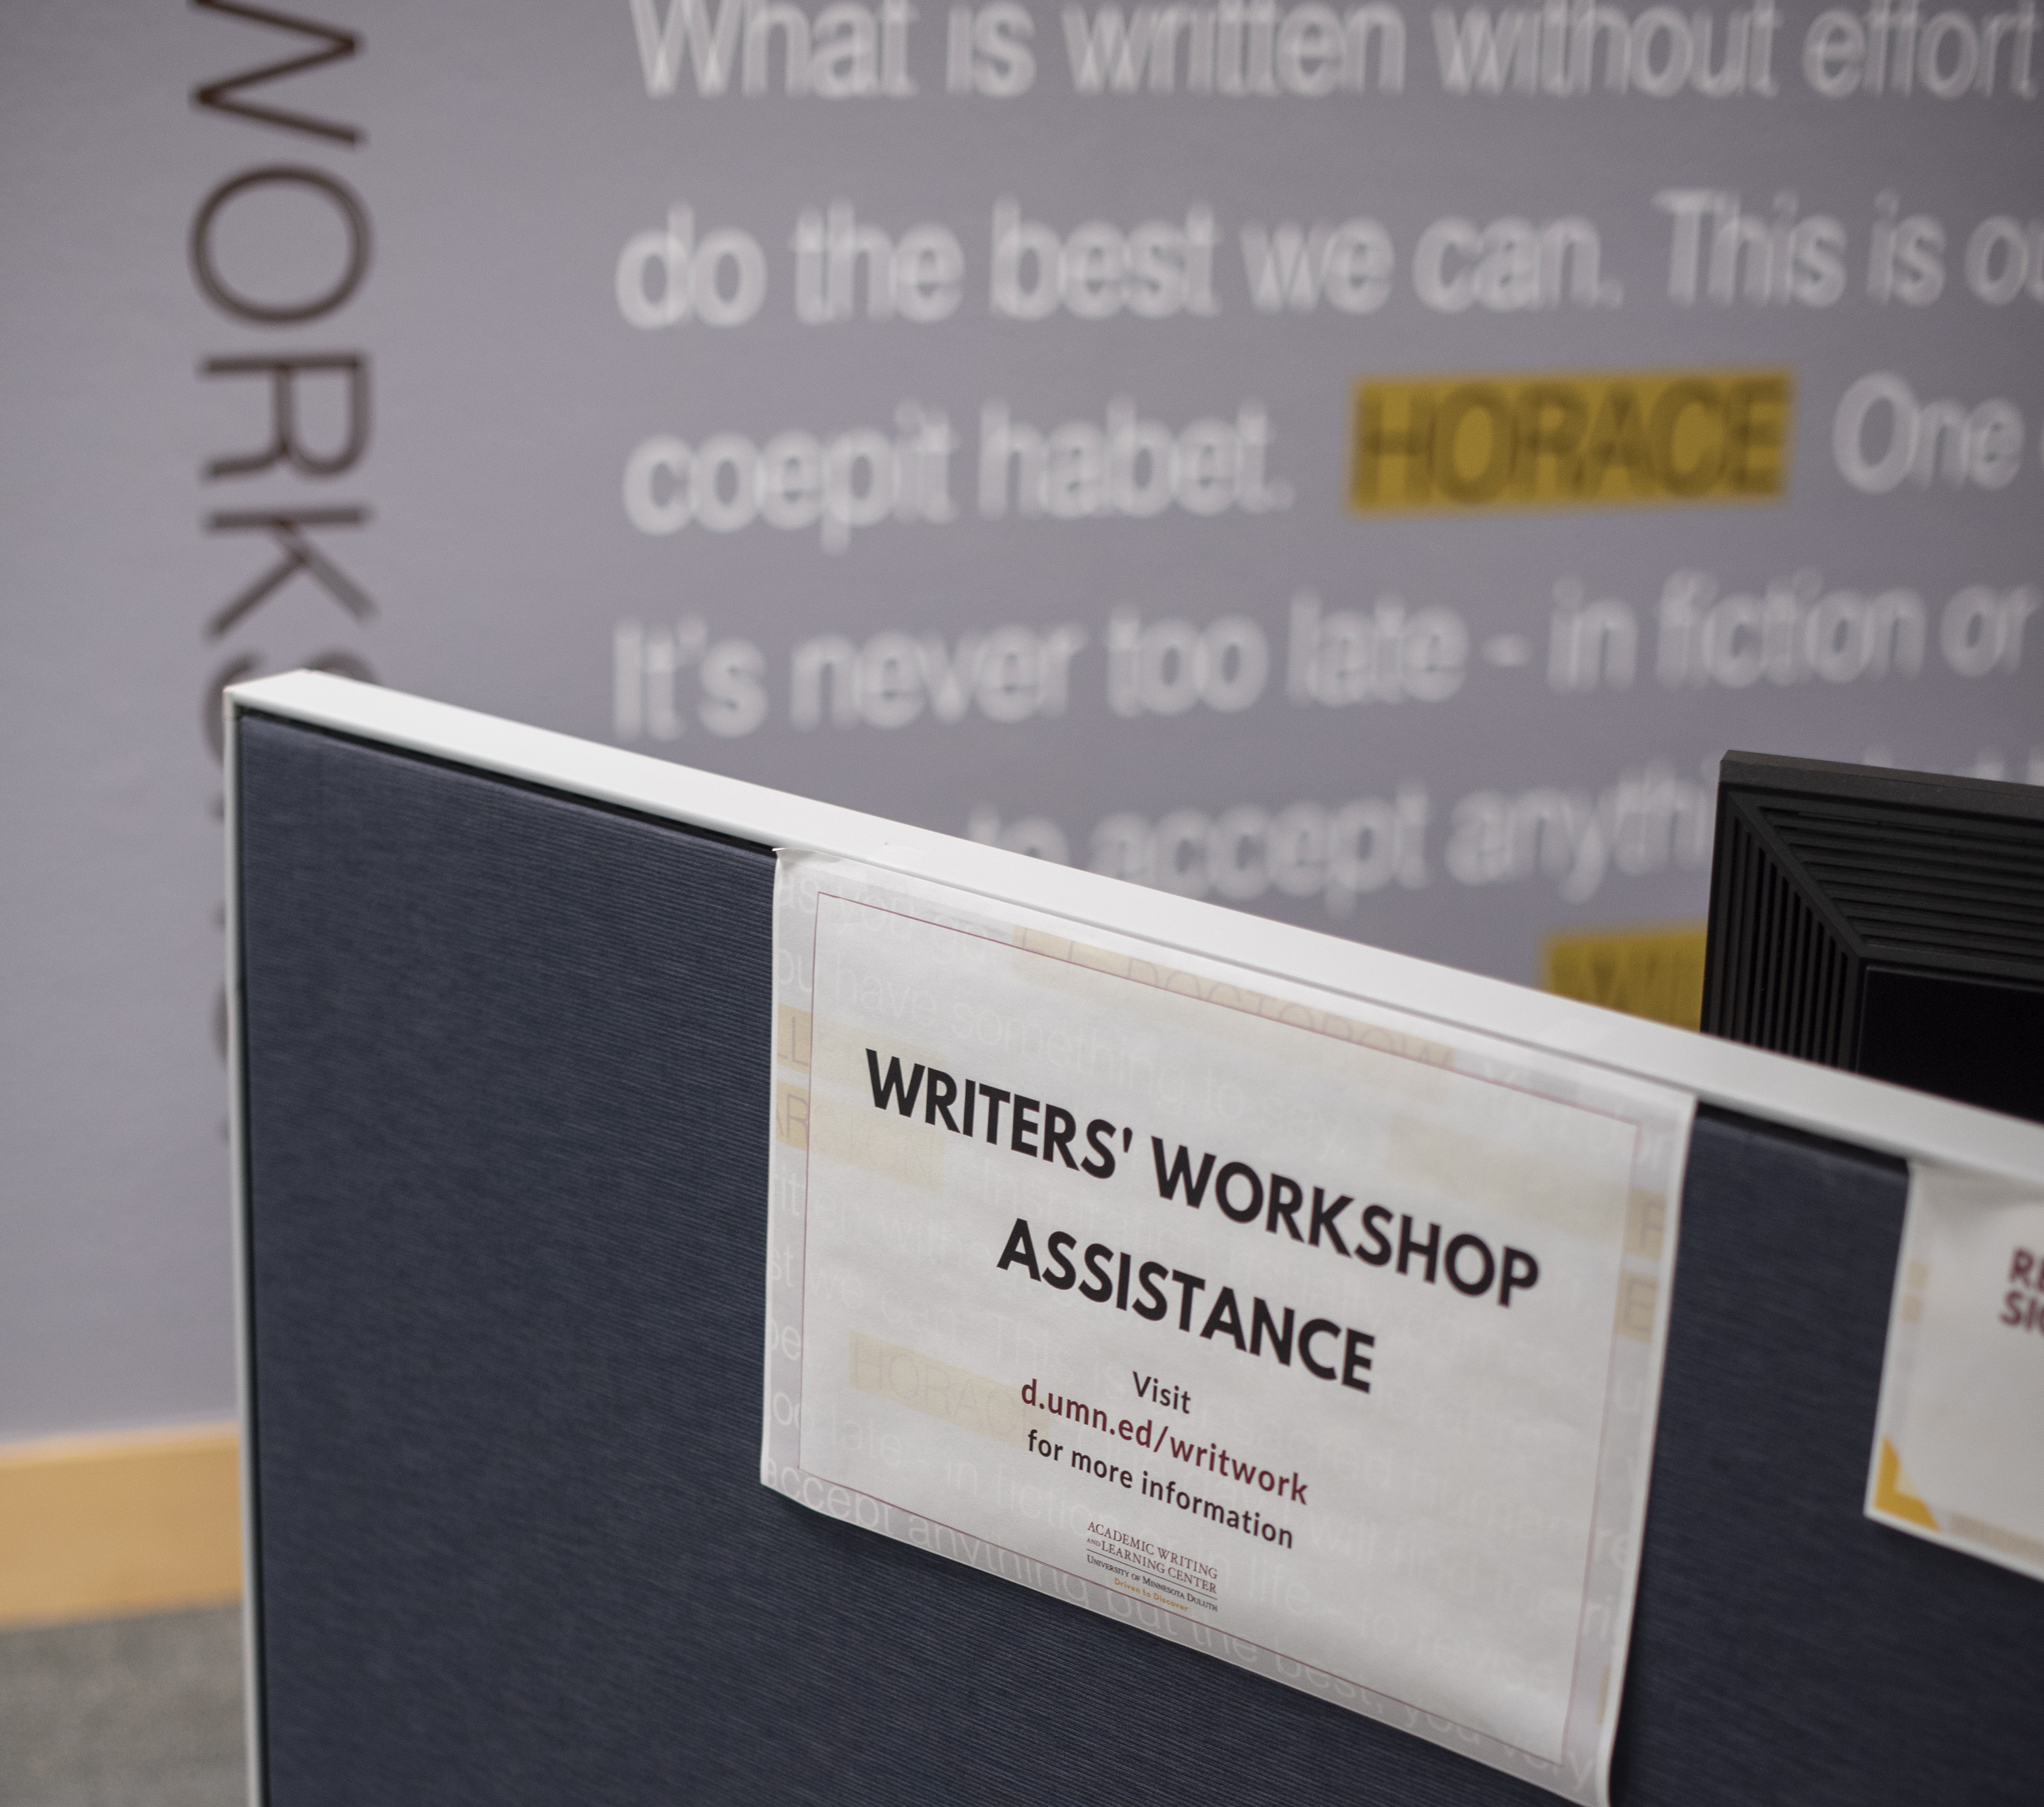 a sign advertising "writers' workshop assistance"